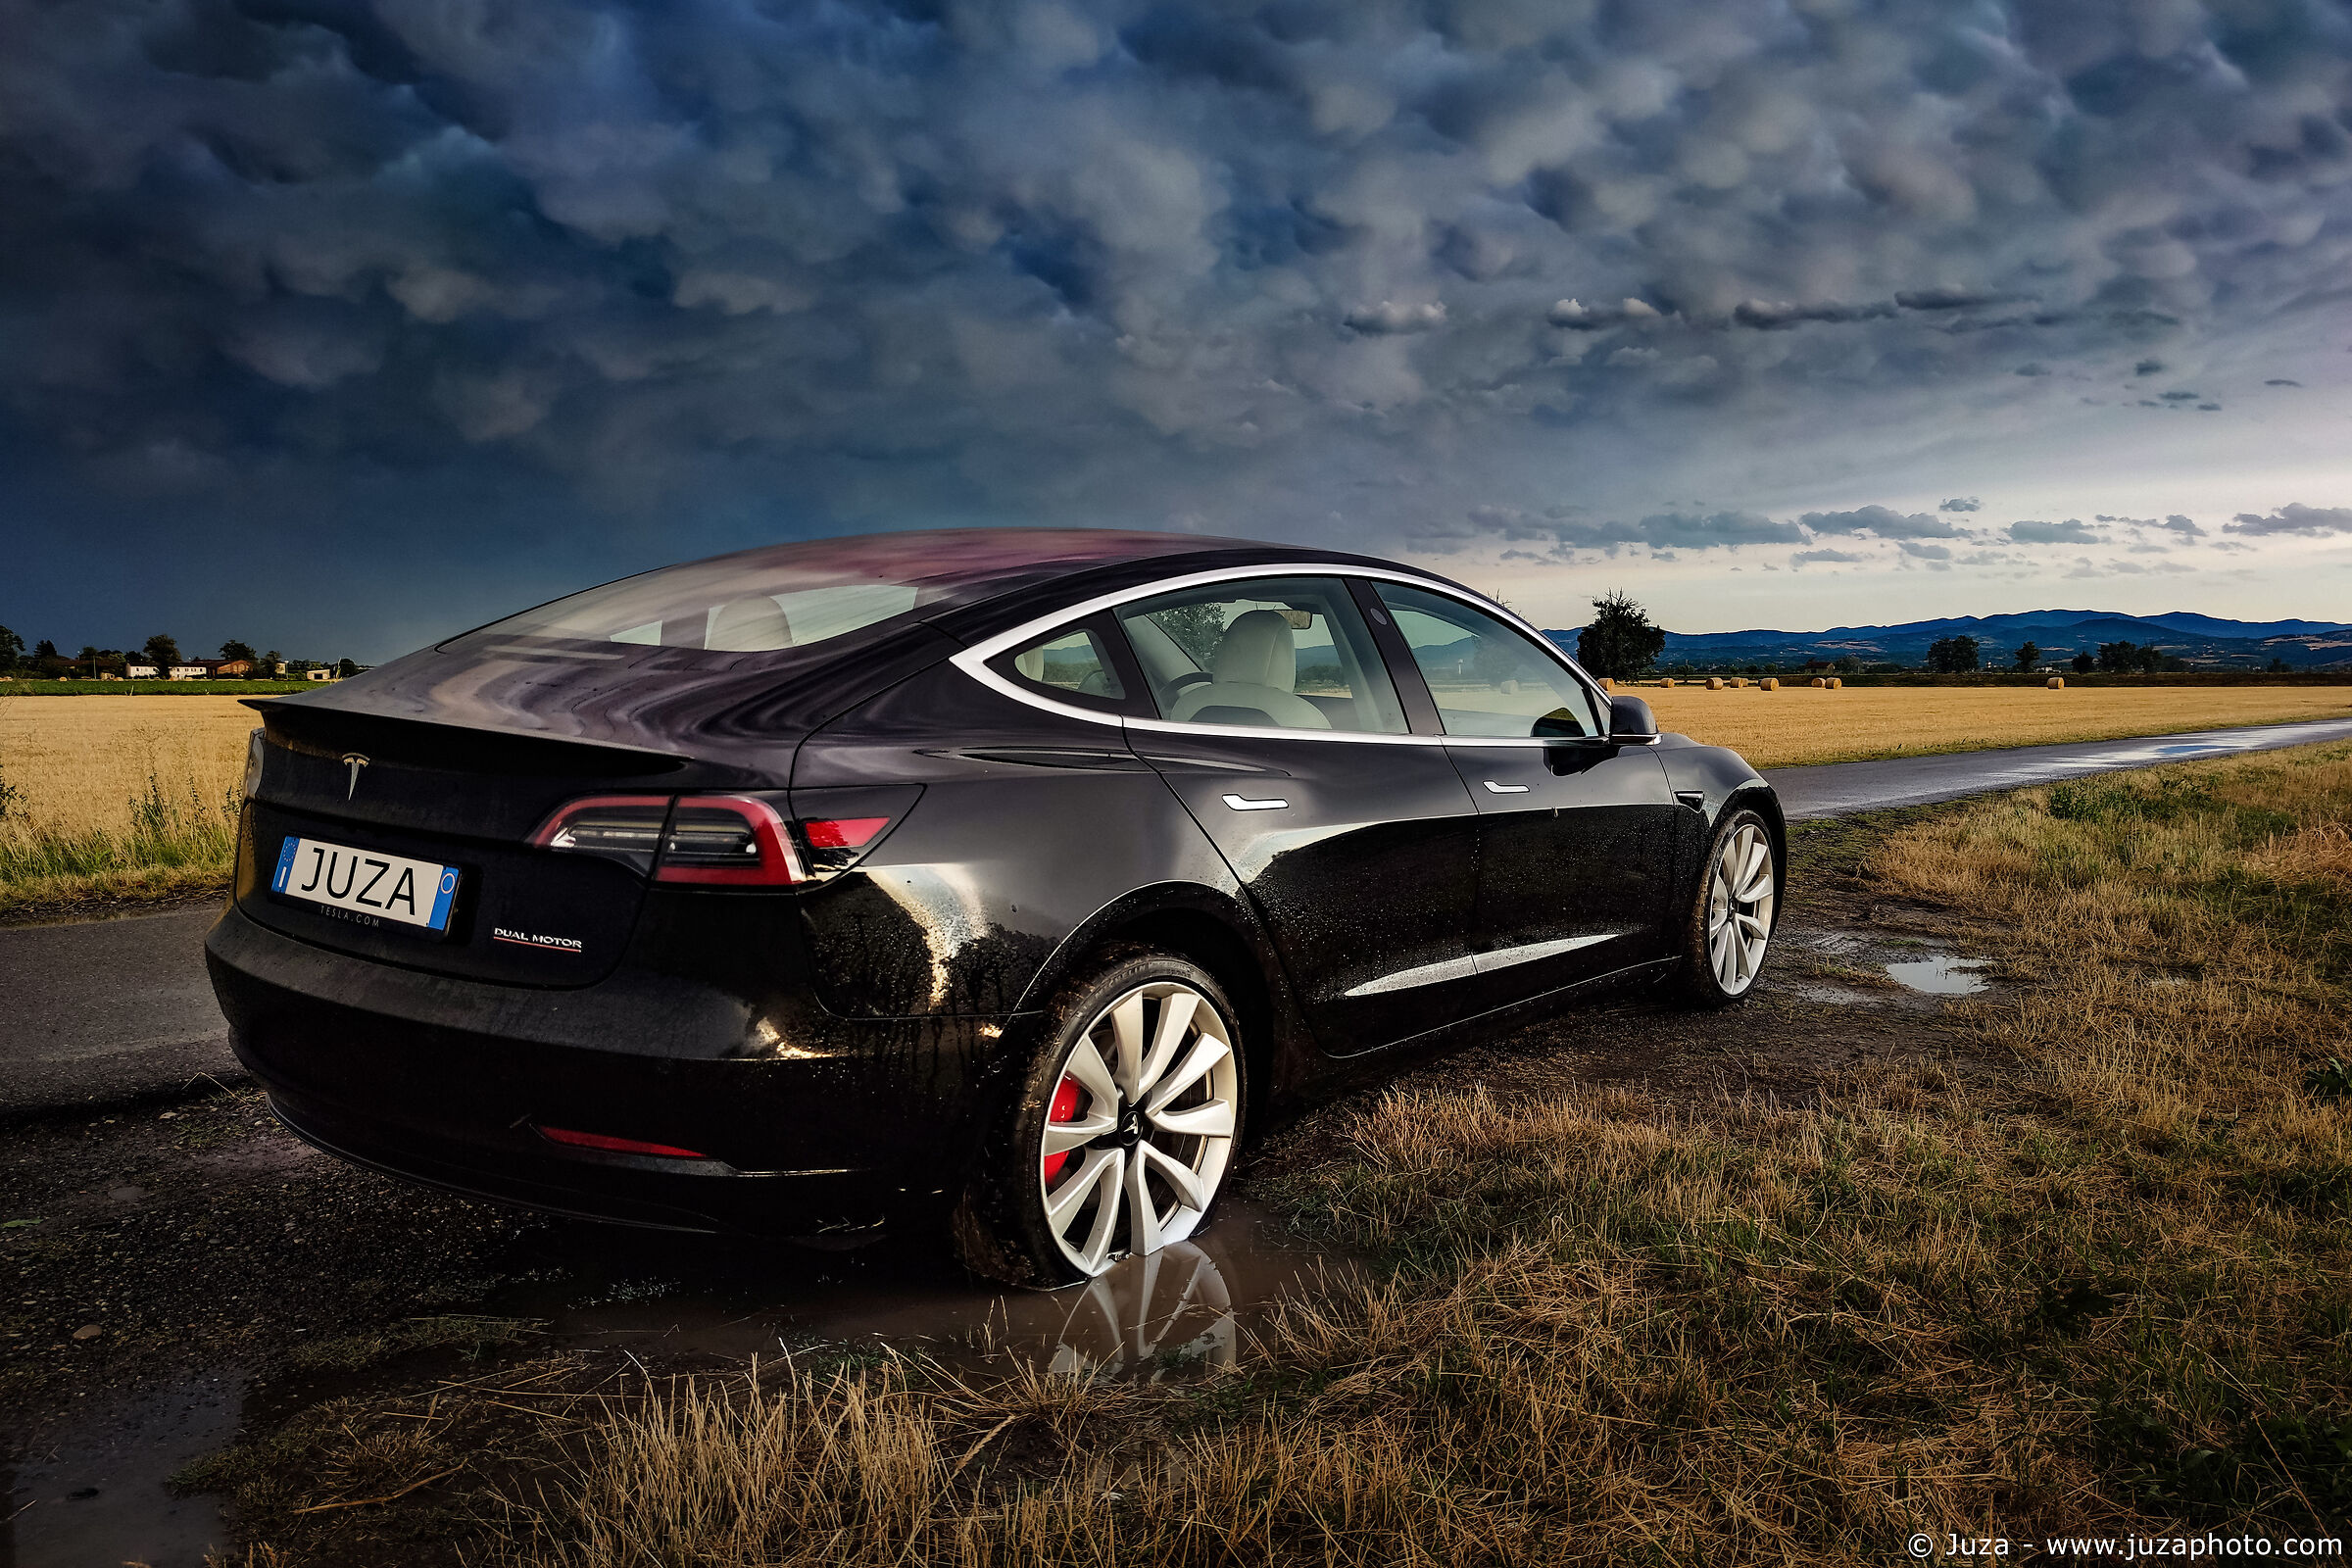 Storm chasing with tesla...